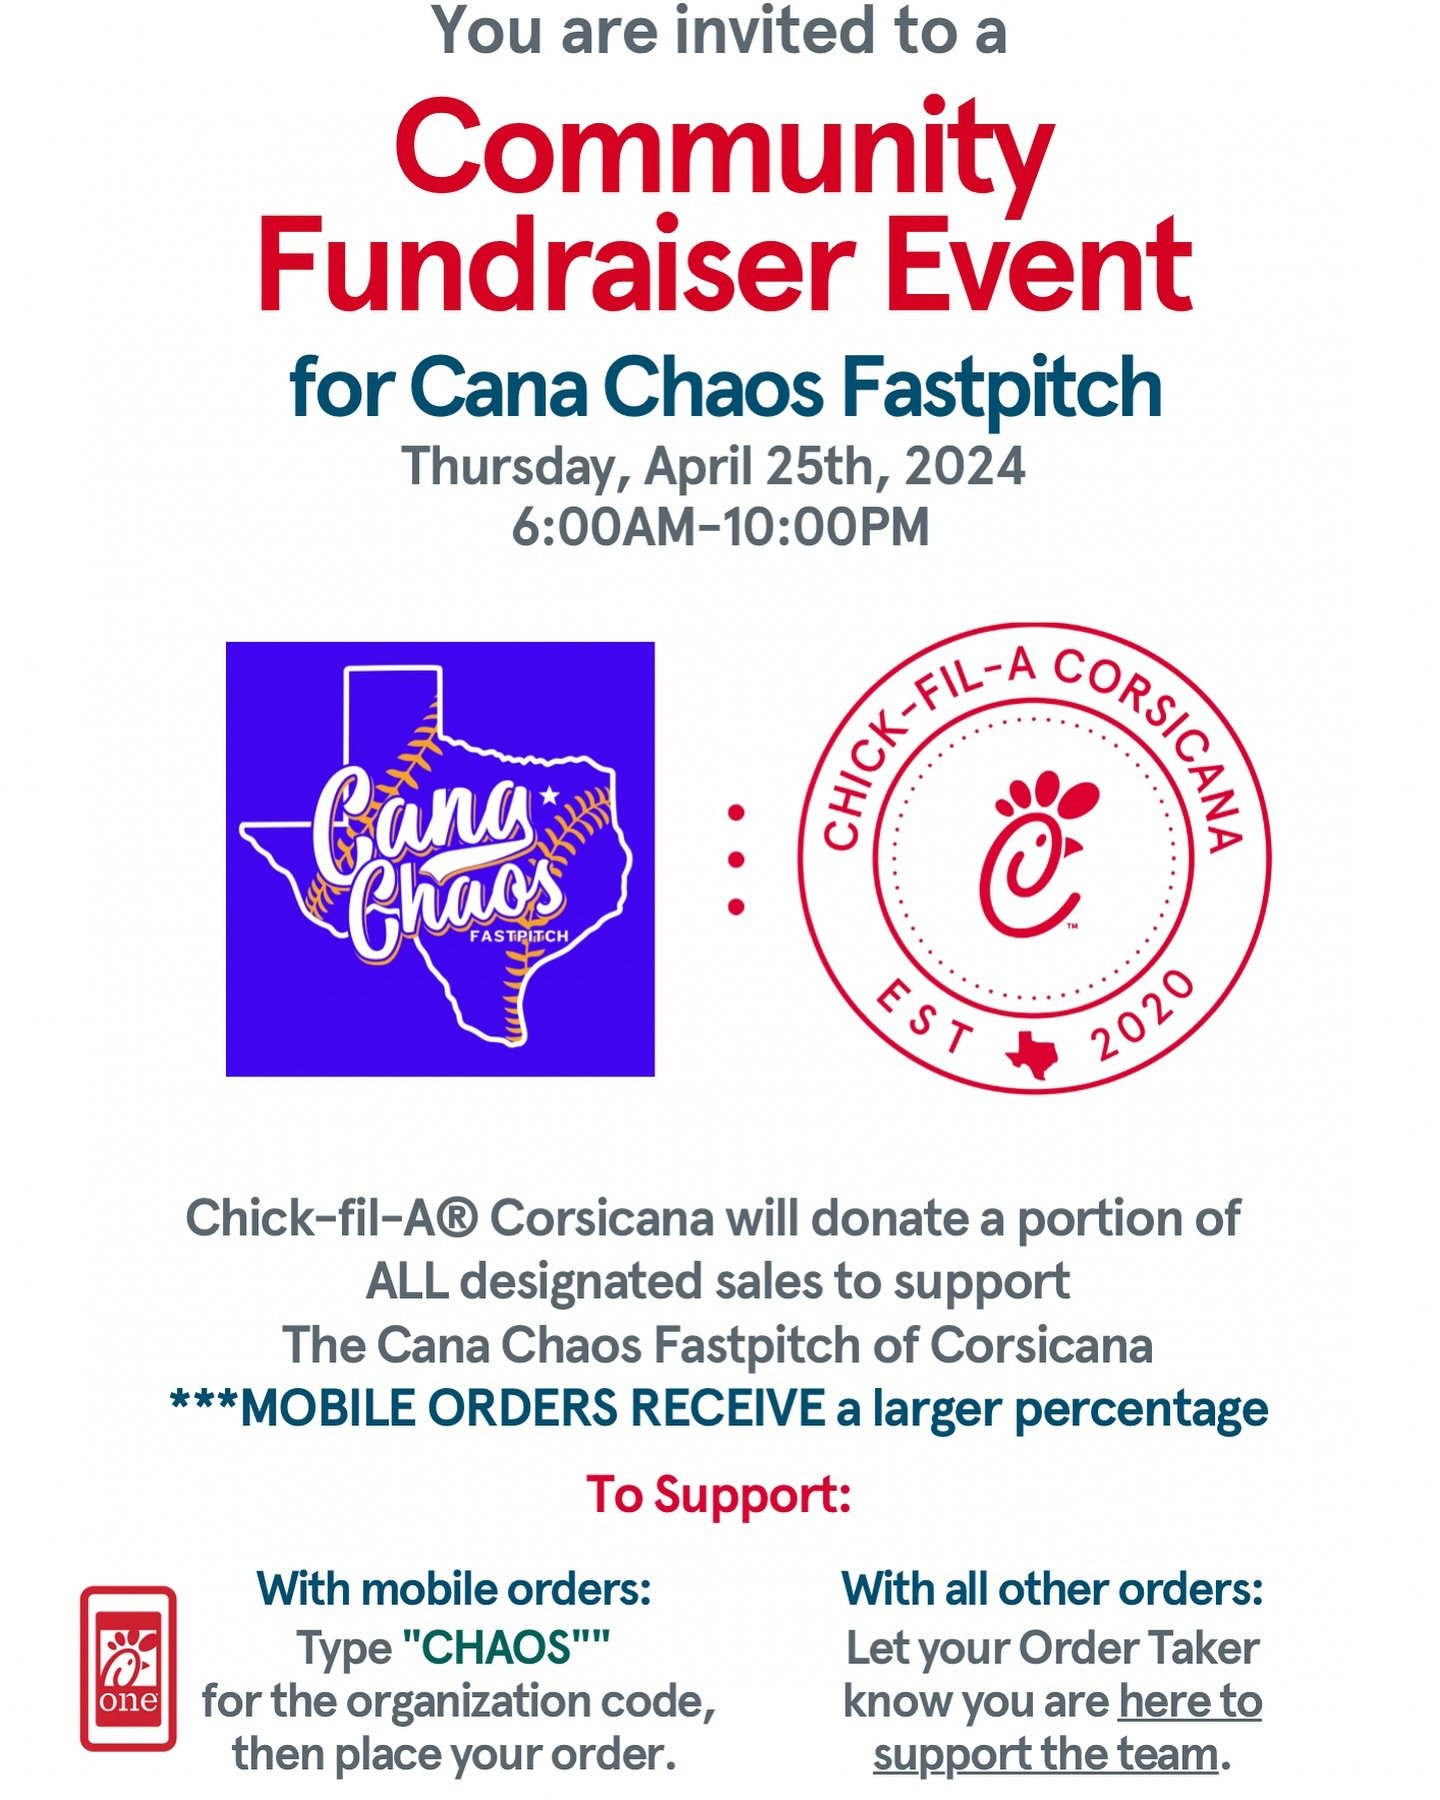 ⏰YOU ARE INVITED: Thursday, April 25th for a Community Fundraiser Event supporting Cana Chaos Fastpitch of Corsicana.

💰We will donate a portion of ALL designated orders on this day. 

☑️To ensure your order counts, please follow these instructions: